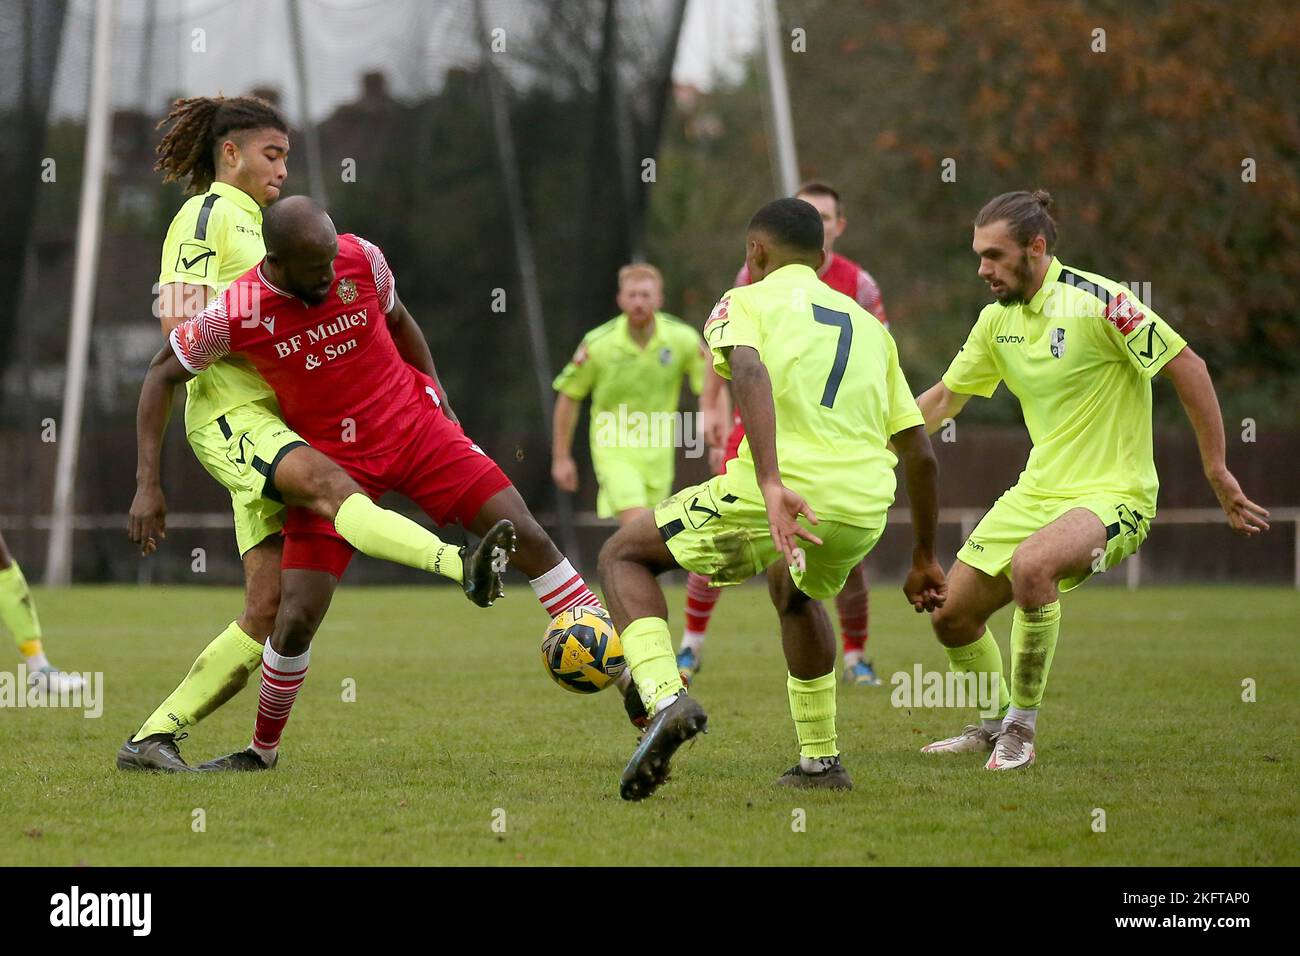 Camron Gbadebo of Wingate & Finchley and Tobi Joseph of Hornchurch during Hornchurch vs Wingate & Finchley, Pitching In Isthmian League Premier Divisi Stock Photo